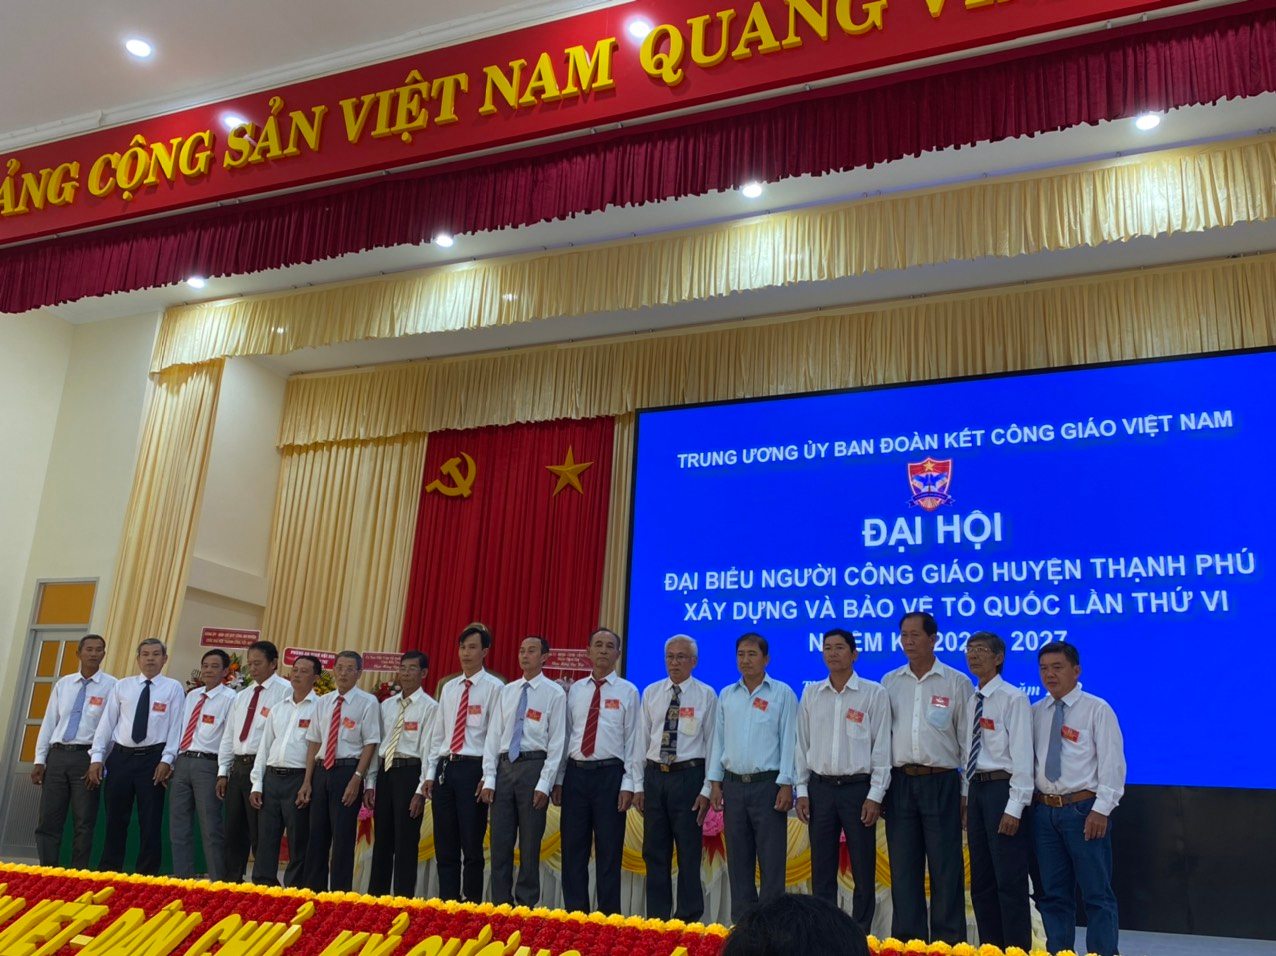 http://cms.btgcp.gov.vn/upload-img/userfiles/images/image-20220825150352-1.png